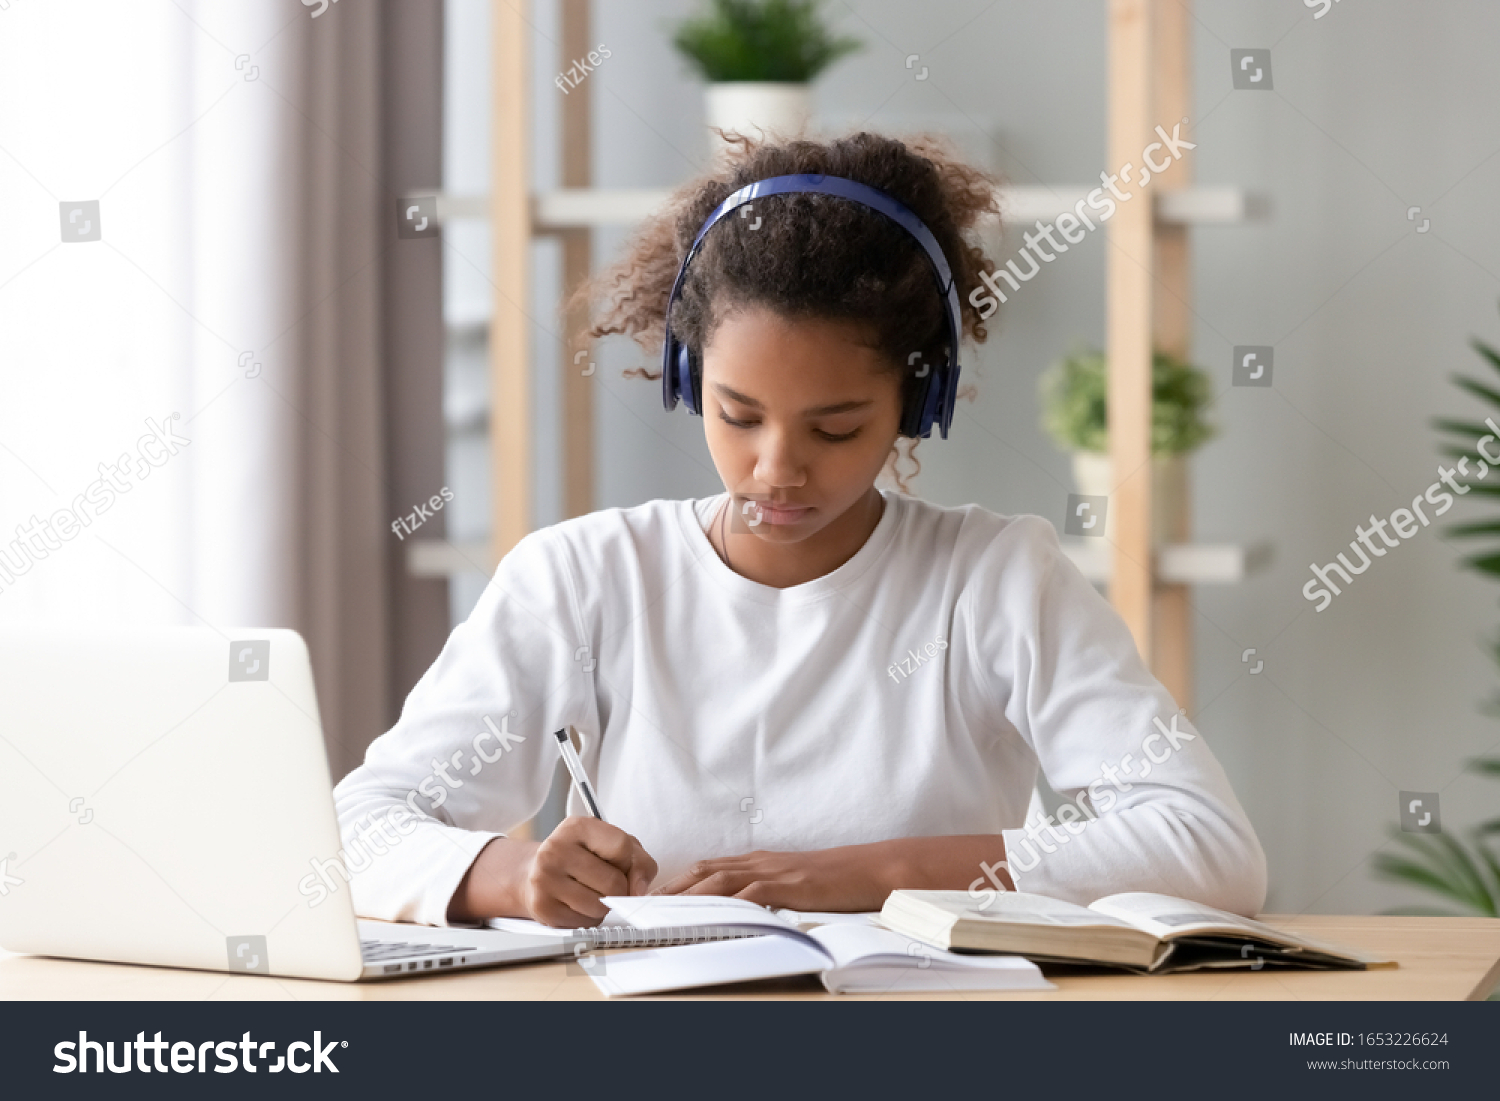 Focused african american teenage girl wearing headphones writing notes study with laptop and books, serious black female high school teen student listening audio course or music while doing homework #1653226624